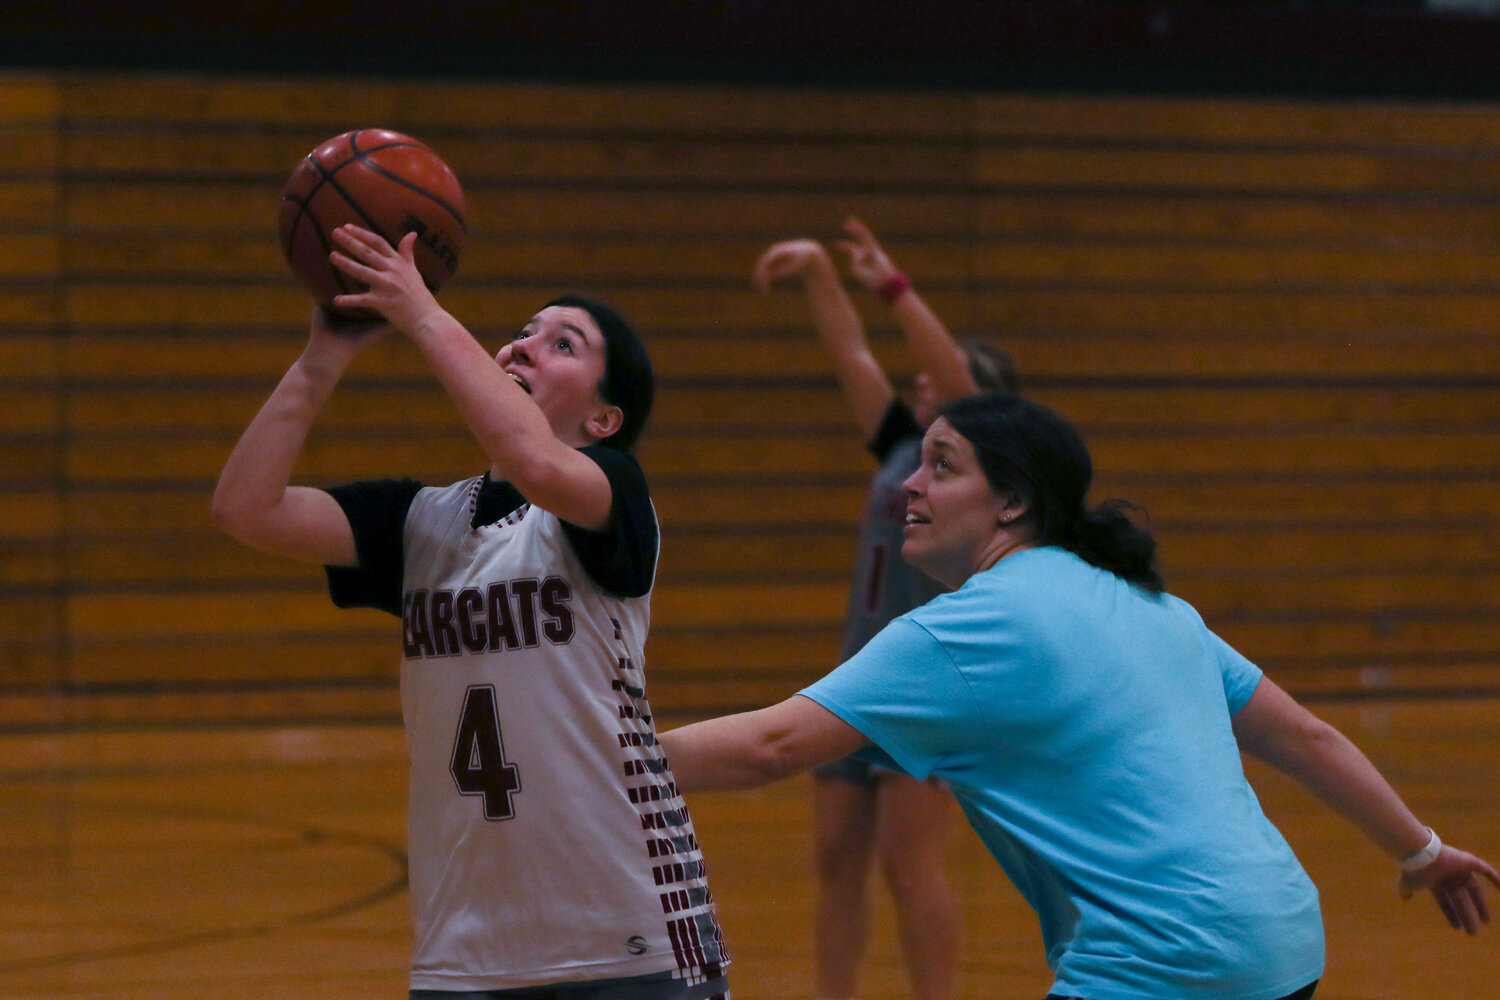 Ellie Clinton gets by assistant coach Caty Lieseke and puts up a shot during a drill in W.F. West's practice on Nov. 21.